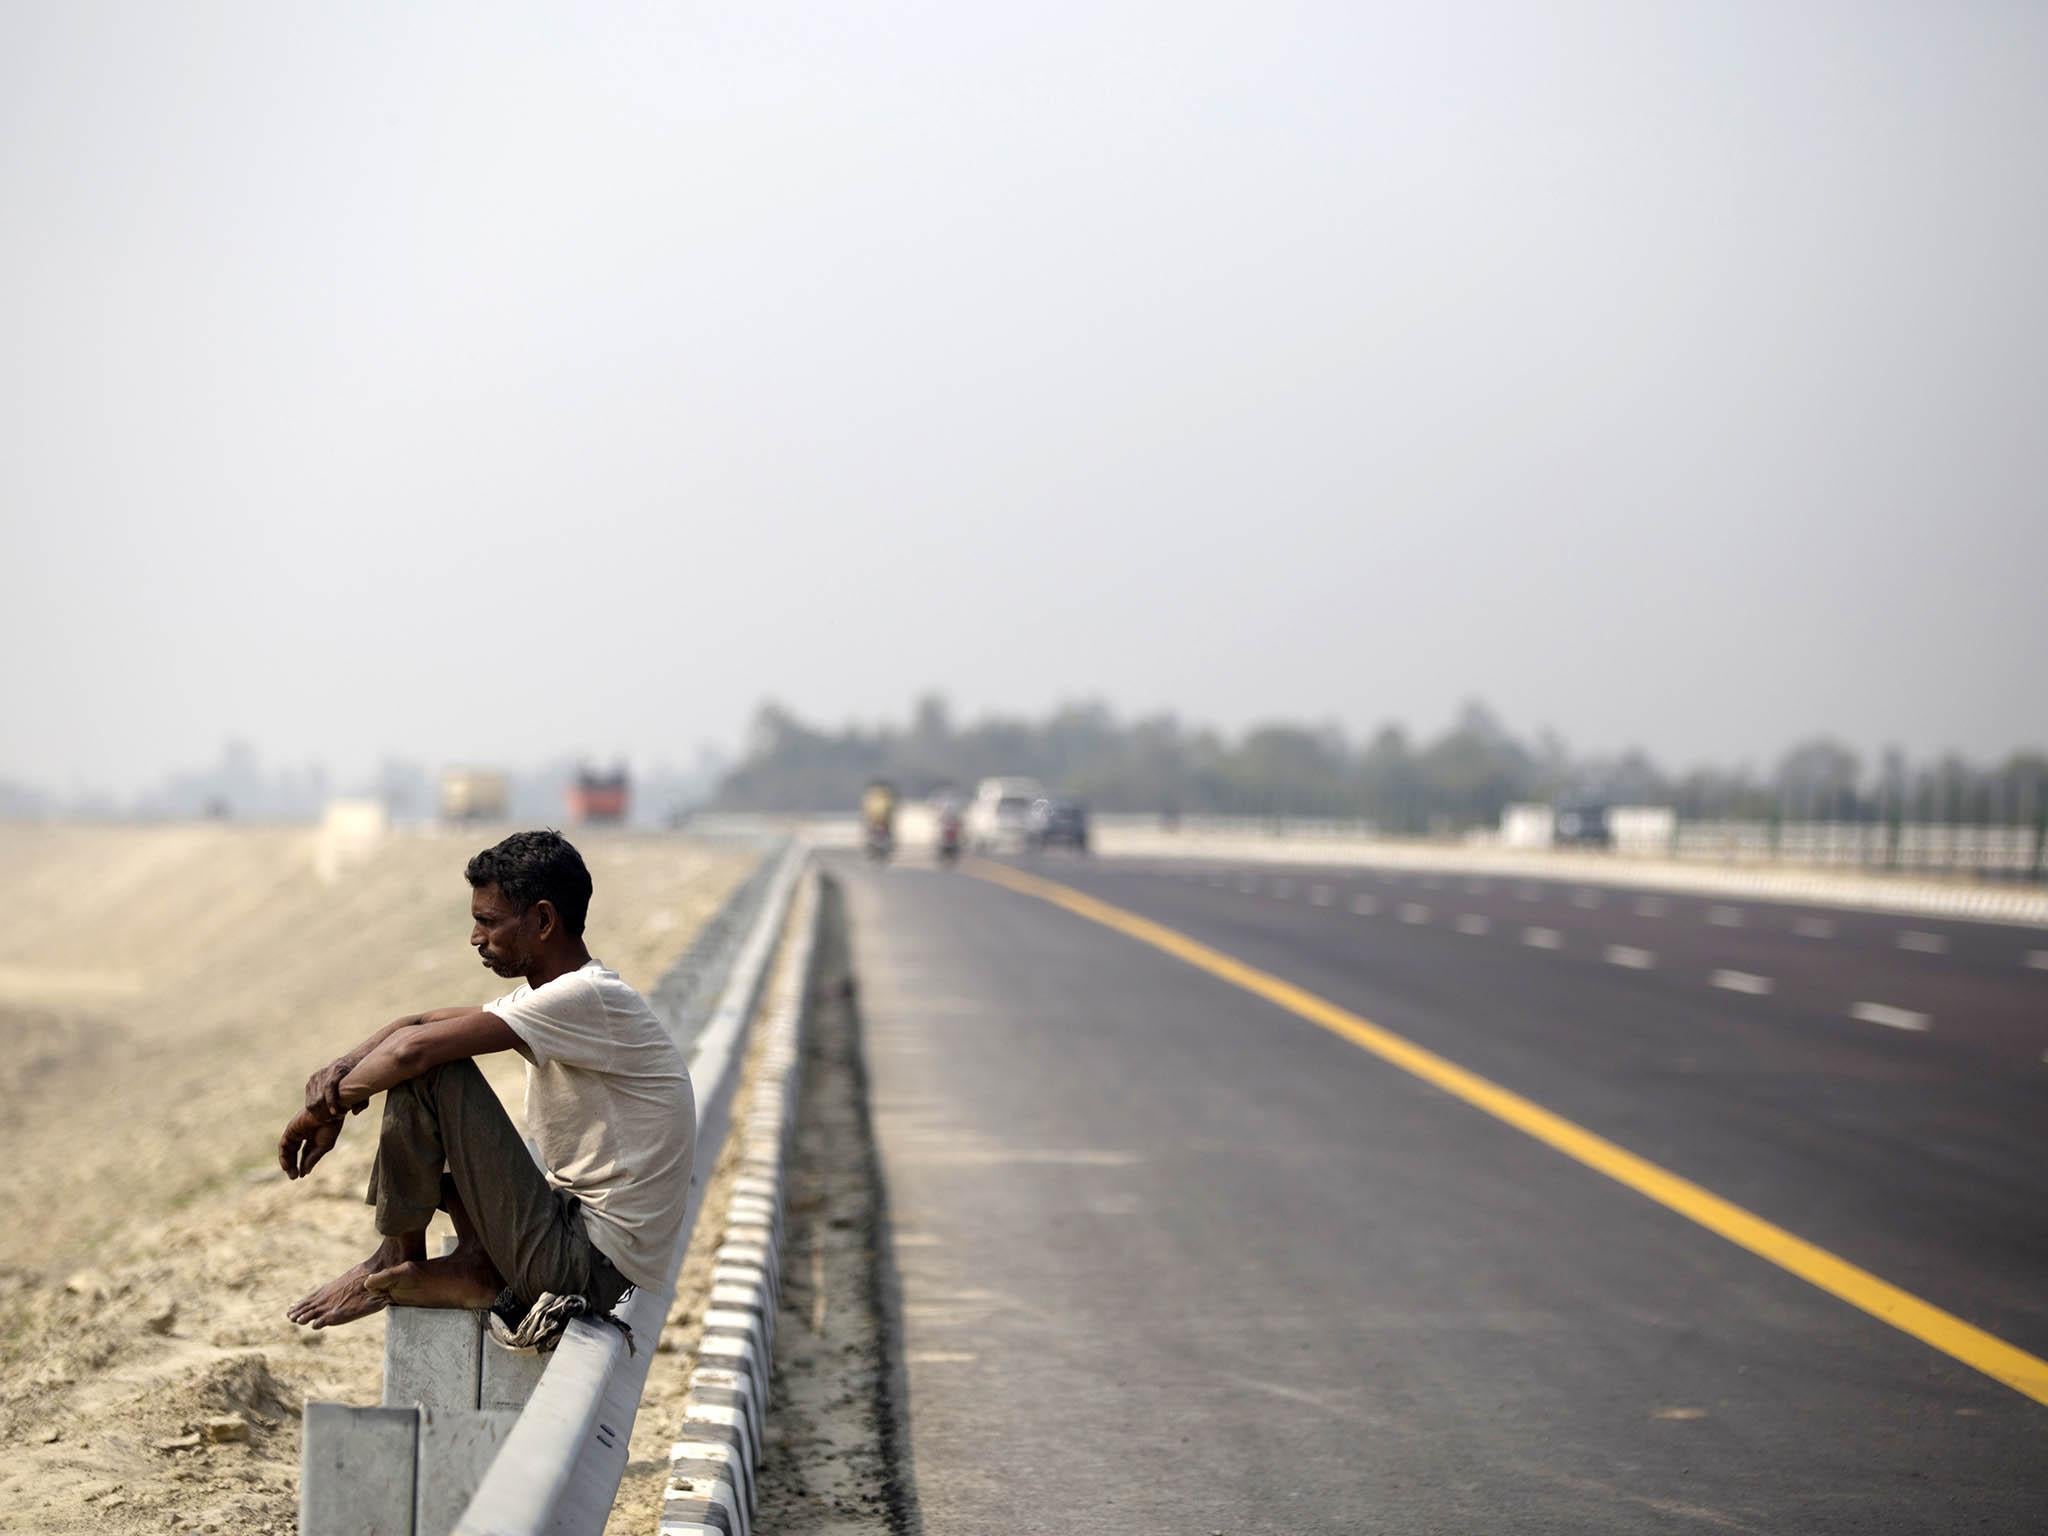 The Agra-Lucknow Expressway on the outskirts of Lucknow, Uttar Pradesh, India